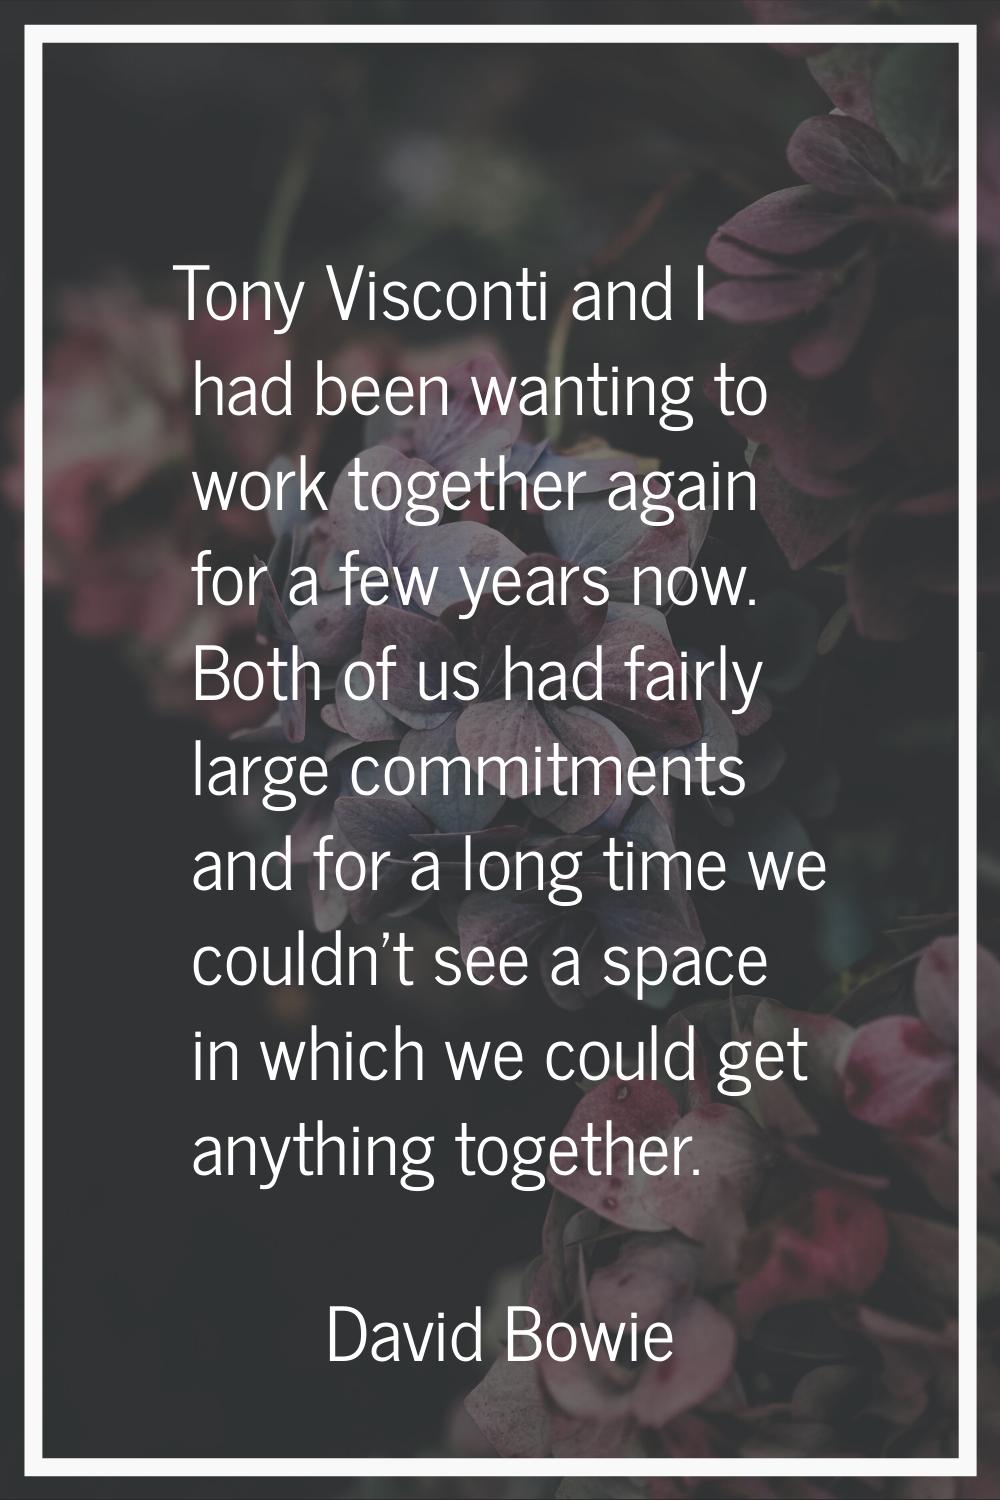 Tony Visconti and I had been wanting to work together again for a few years now. Both of us had fai